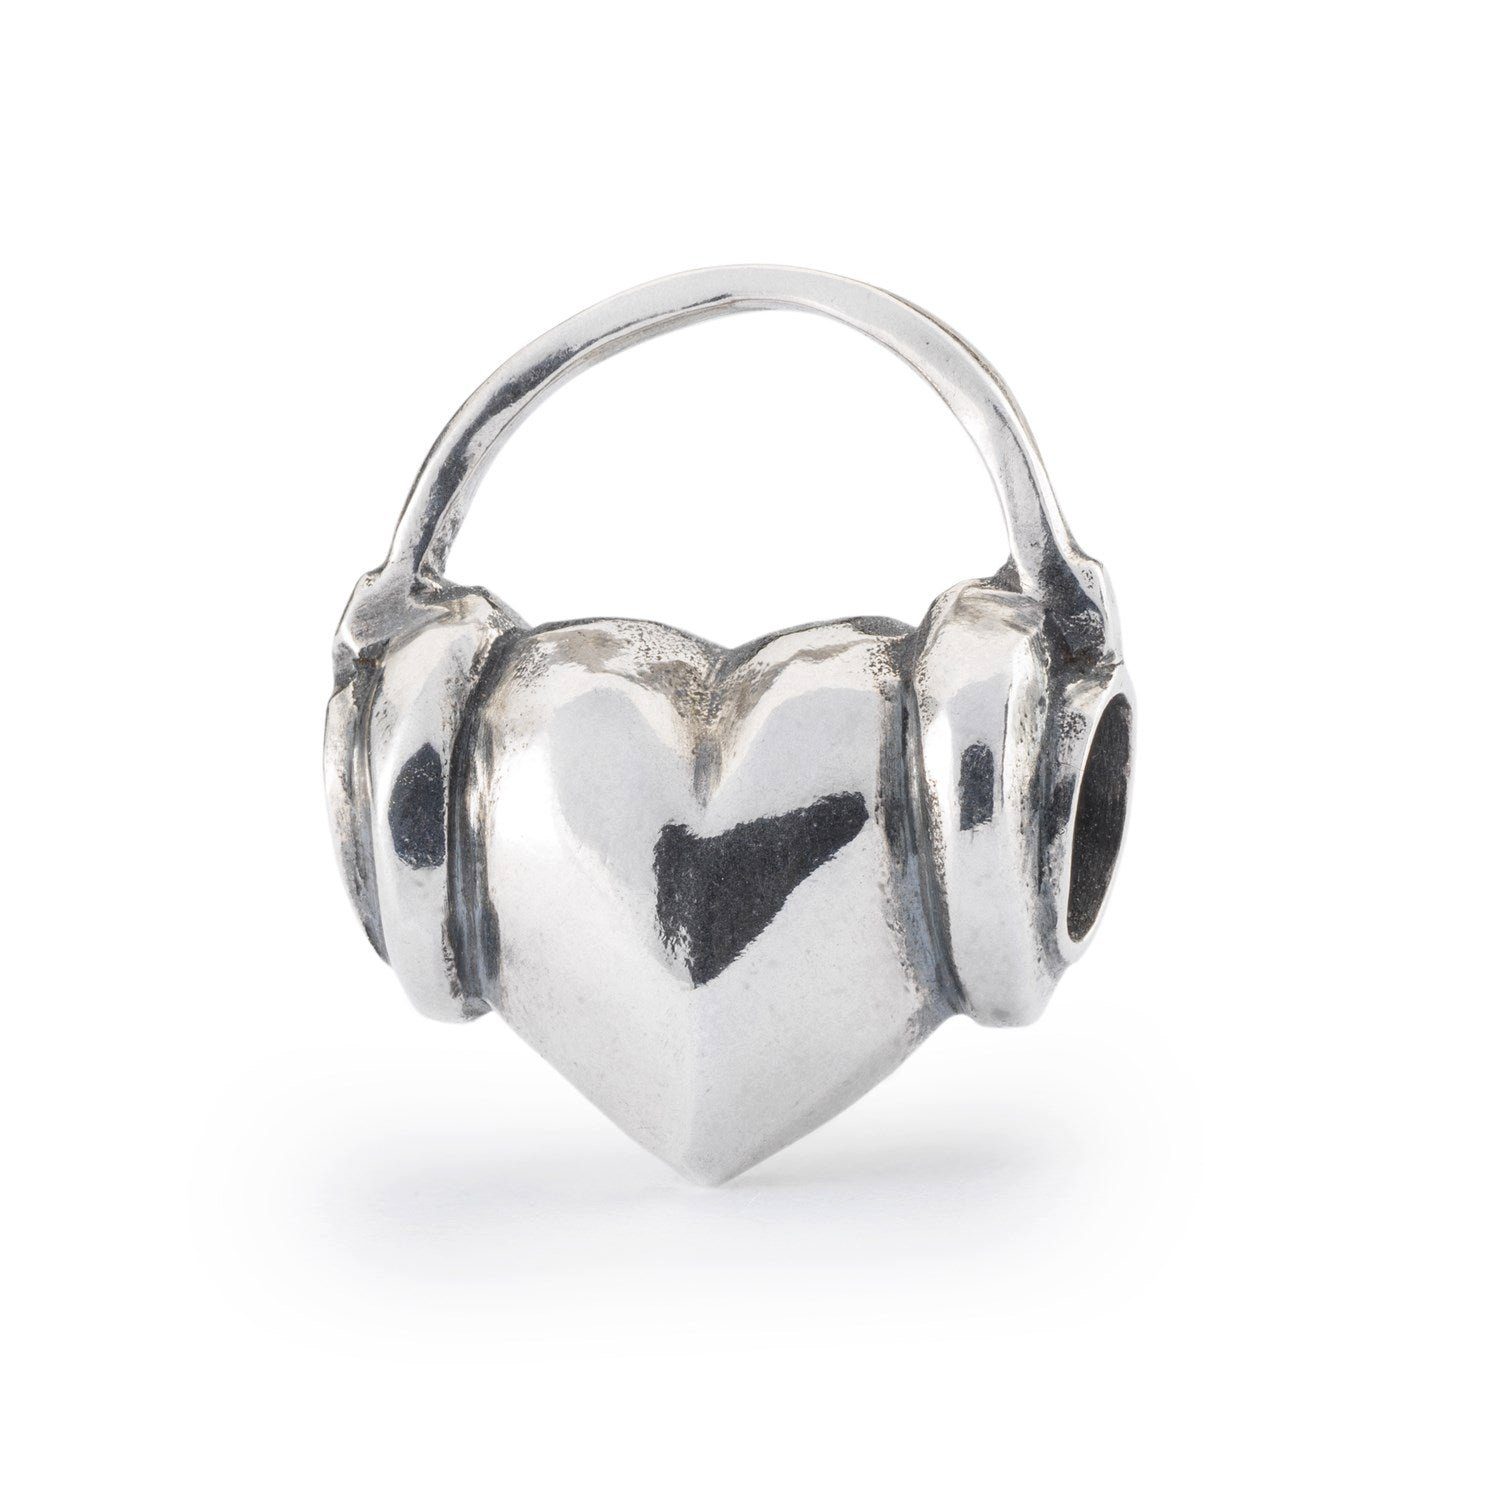 Trollbeads Bead Unsere Melodie, TAGBE-20259